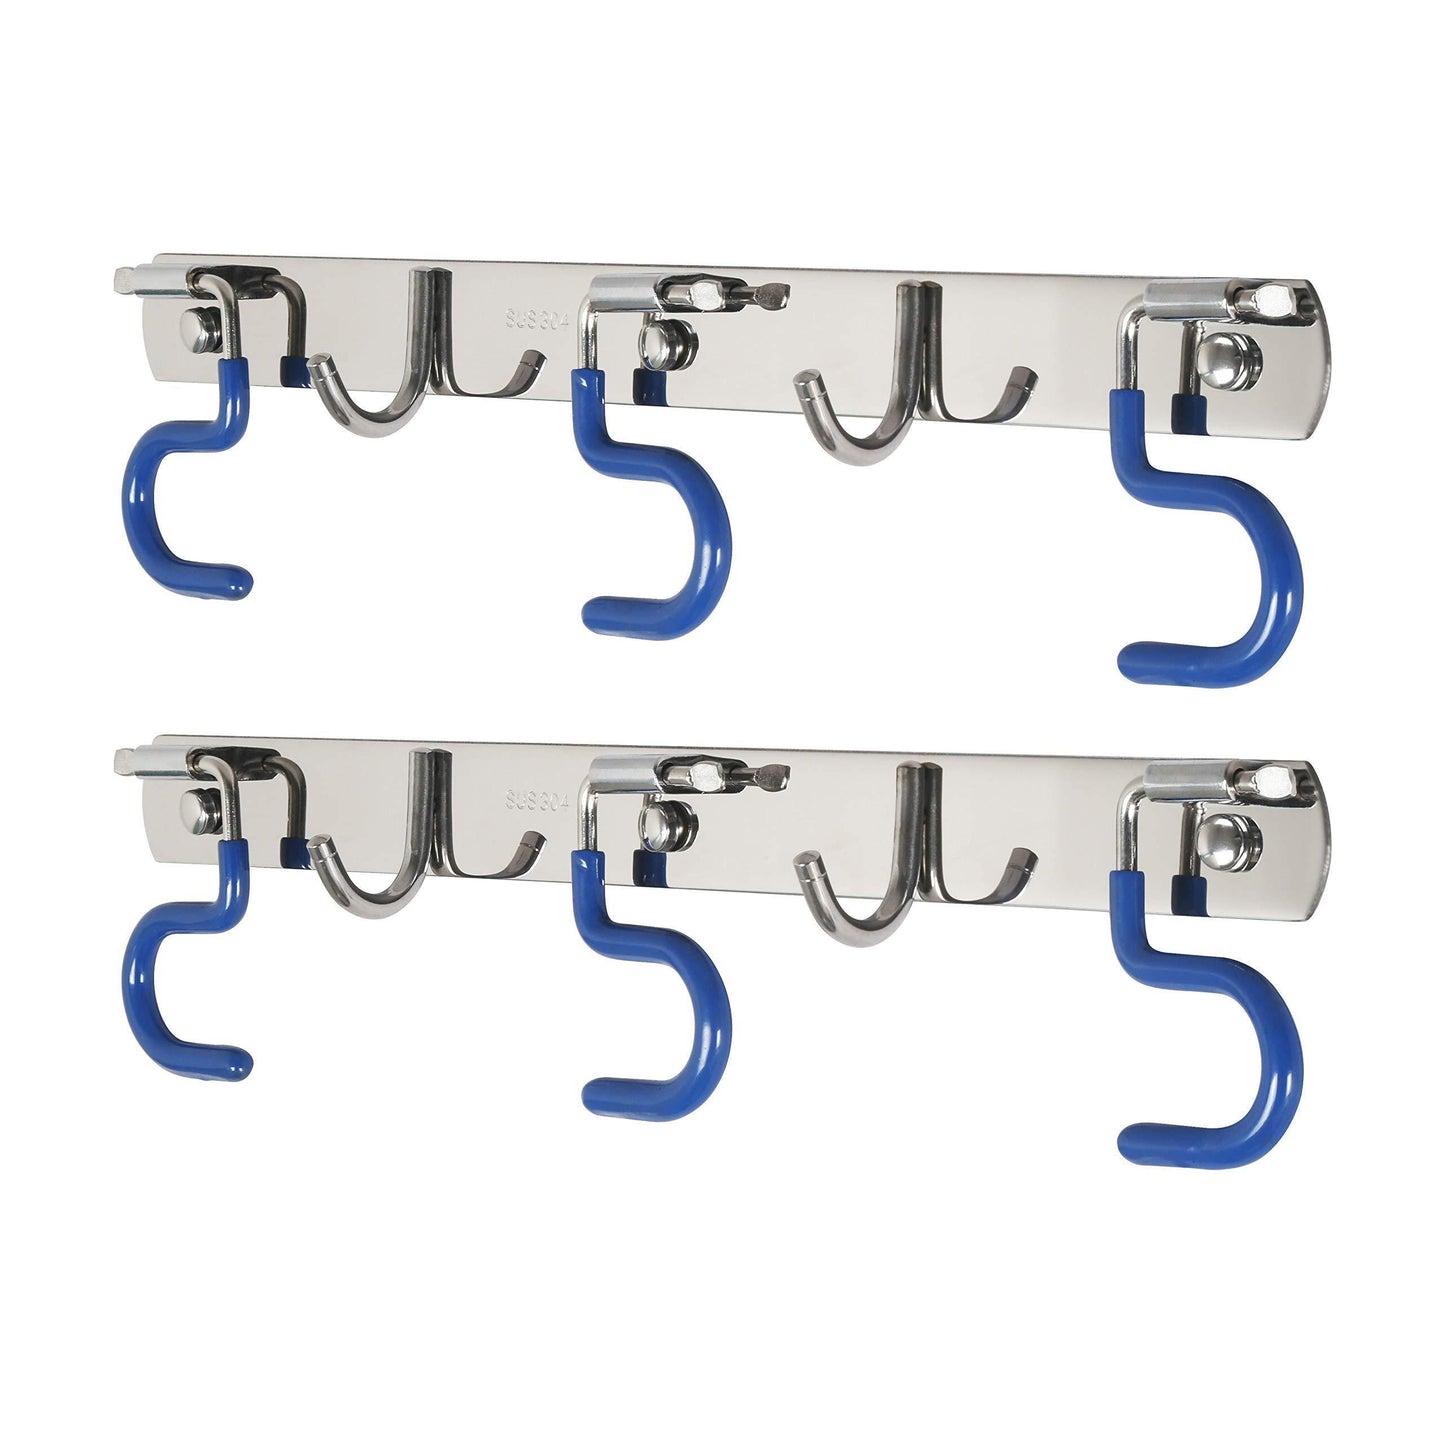 Shop here webi broom mop holder sturdy stainless steel cleaning tool organizer hanger rack with 2 fixed hook 3 s hook for kitchen garage garden 2 pack